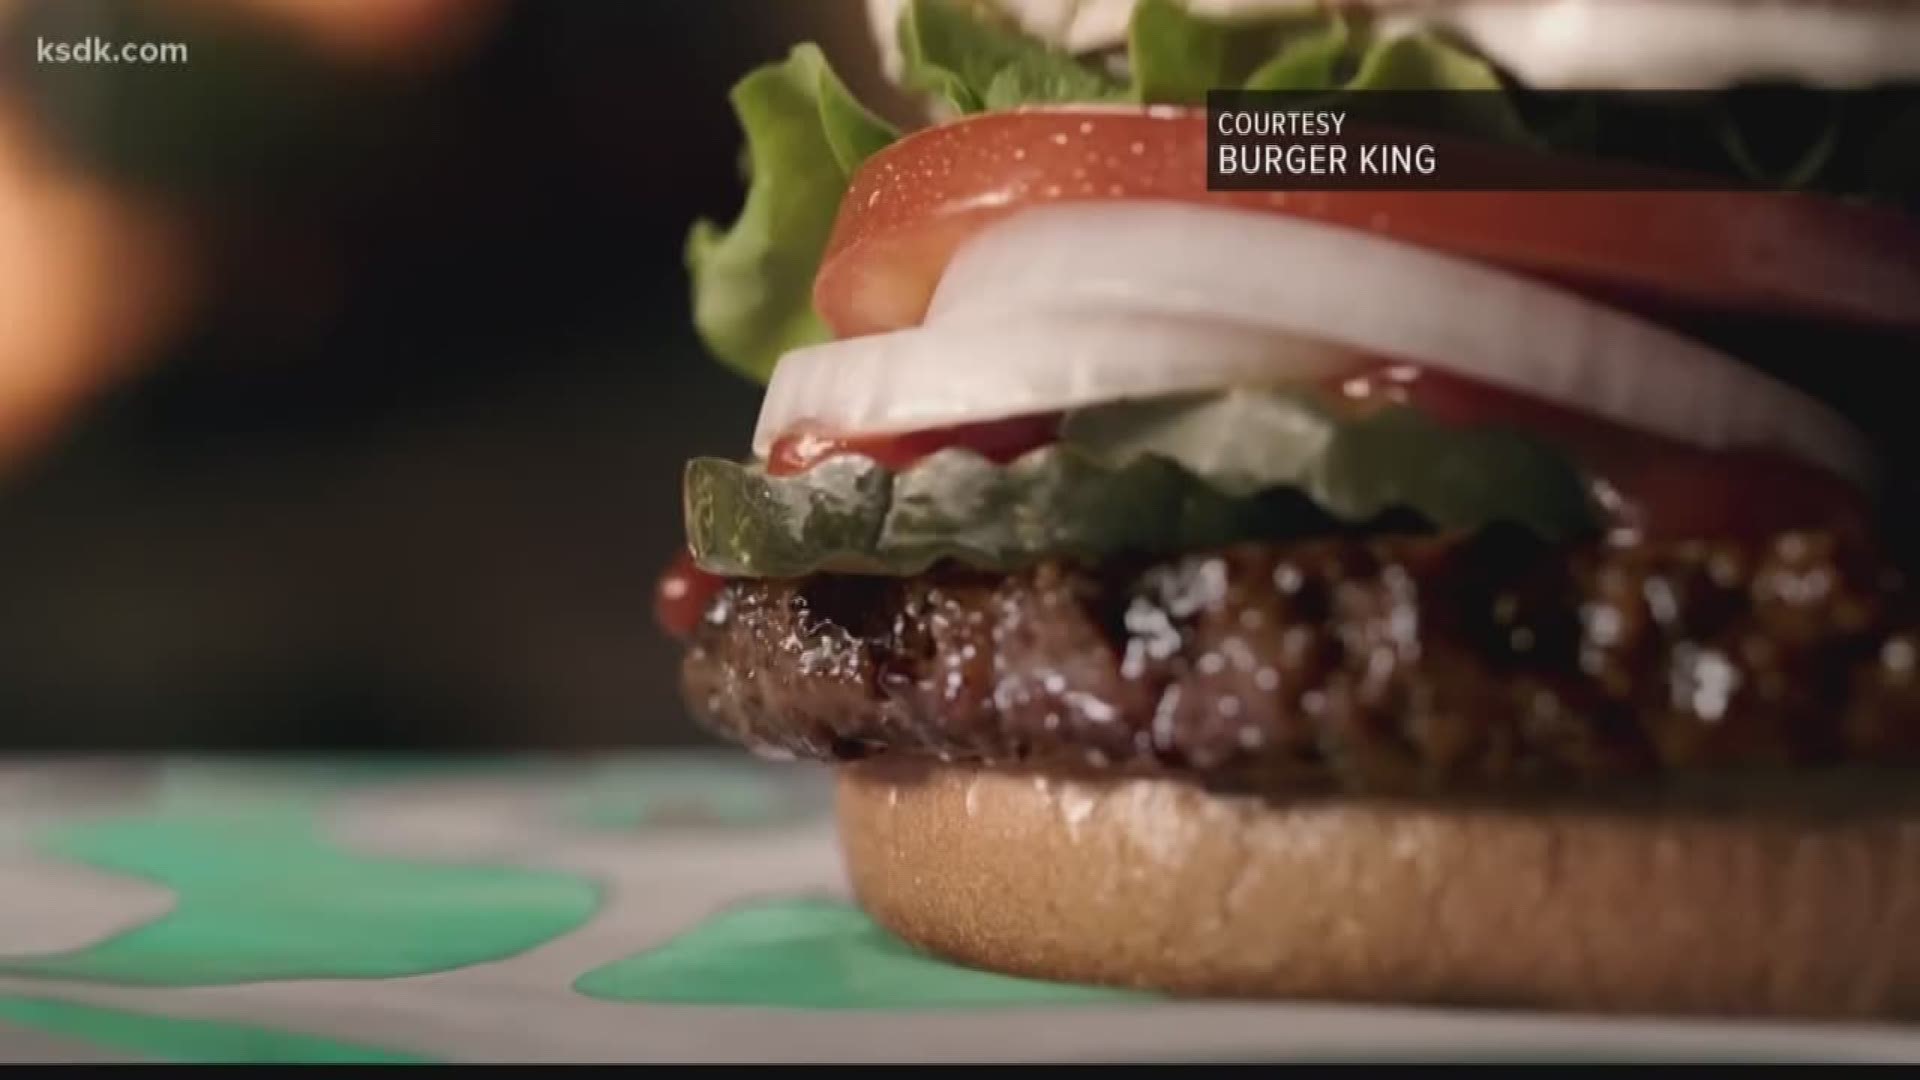 The Impossible Burger is one of the hottest things in the culinary world. Every week, more and more restaurants are adding it to their menu. But what exactly is in the Impossible Burger that makes it taste and look like beef?